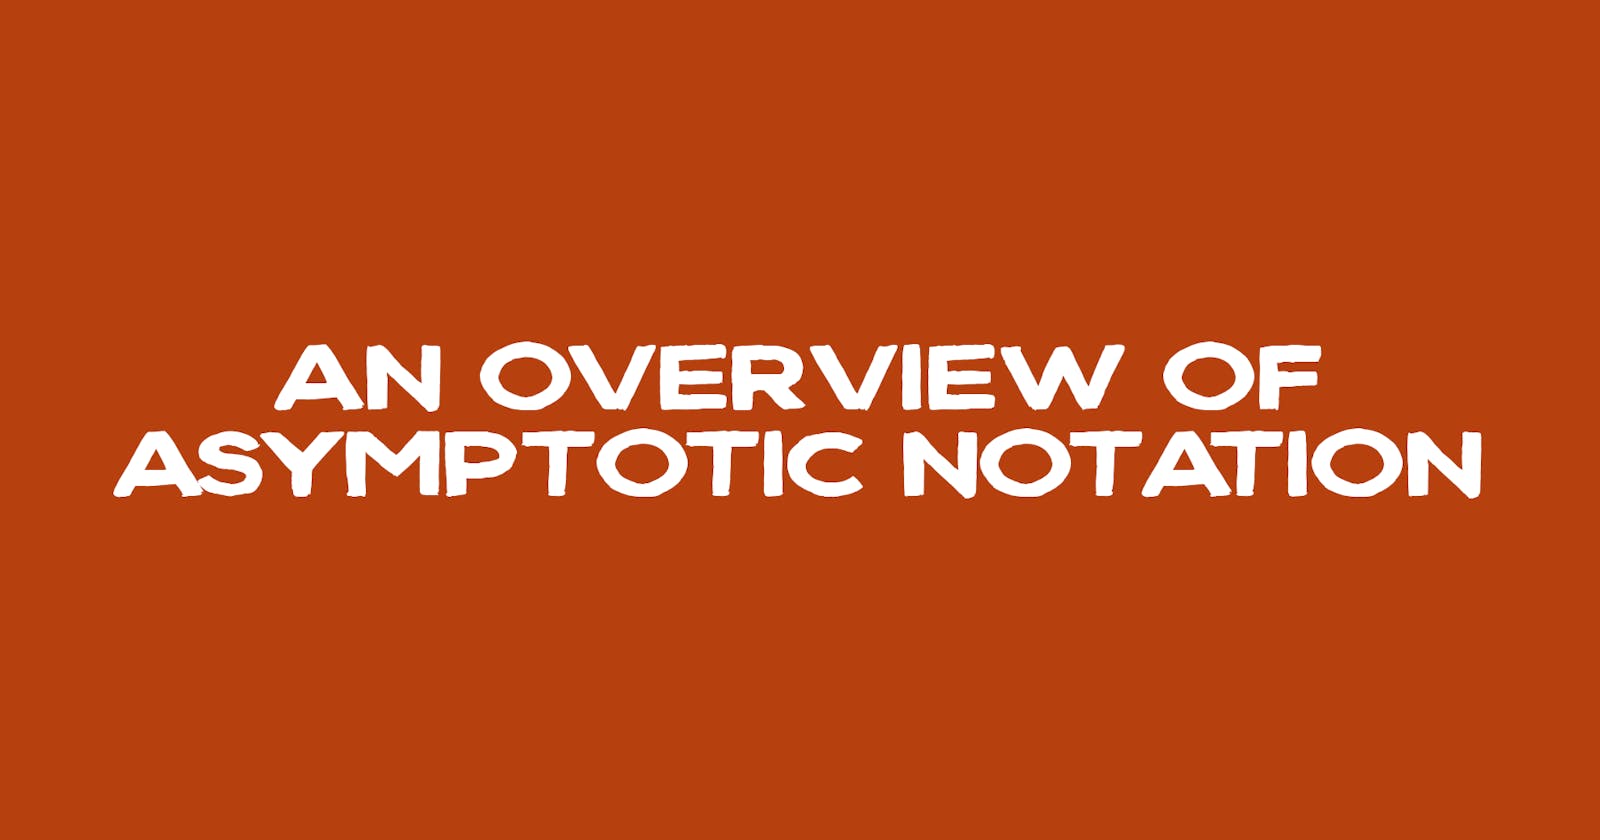 An Overview of Asymptotic Notation